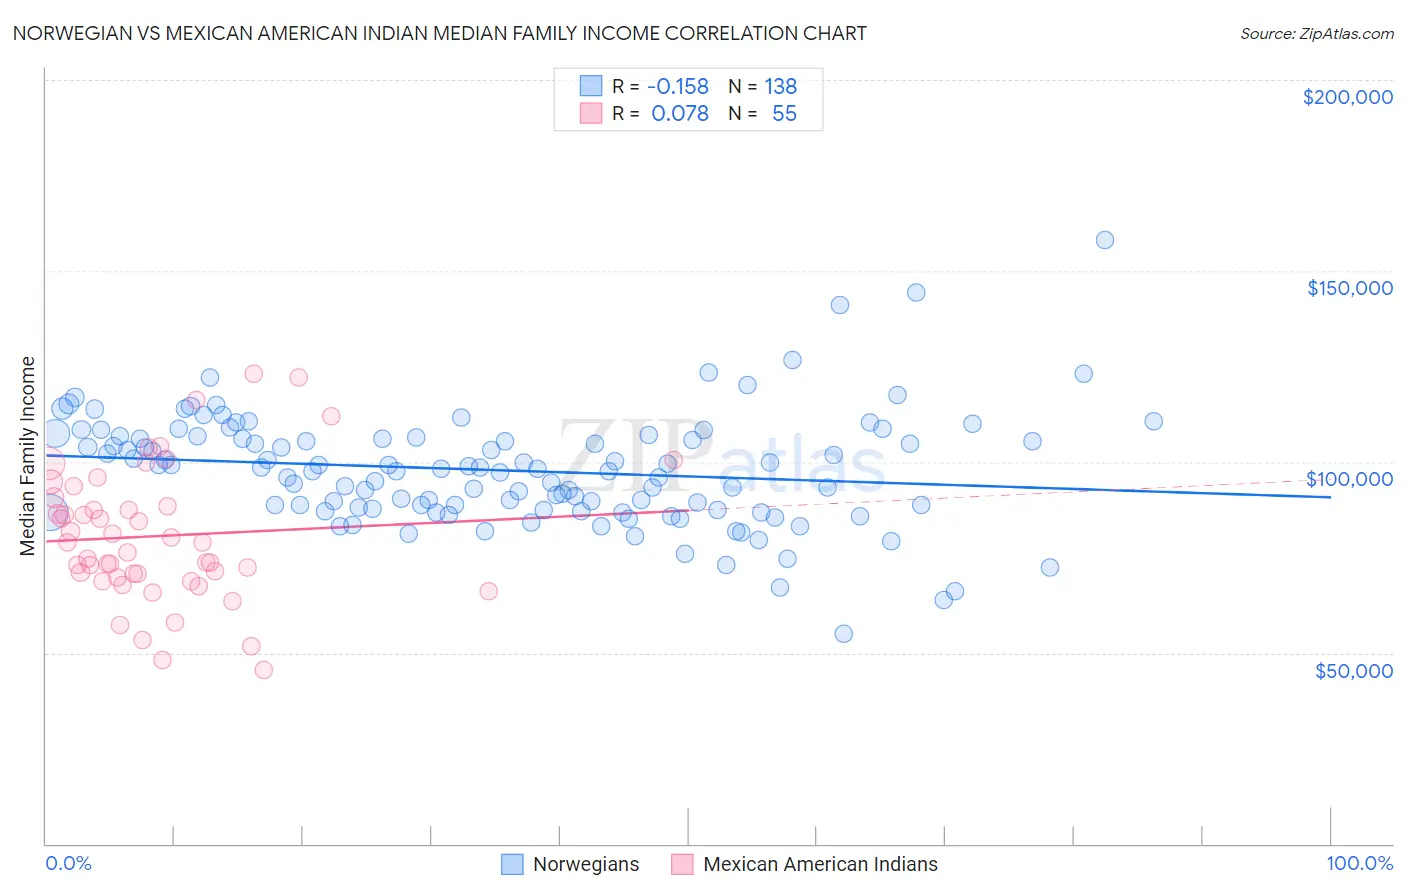 Norwegian vs Mexican American Indian Median Family Income